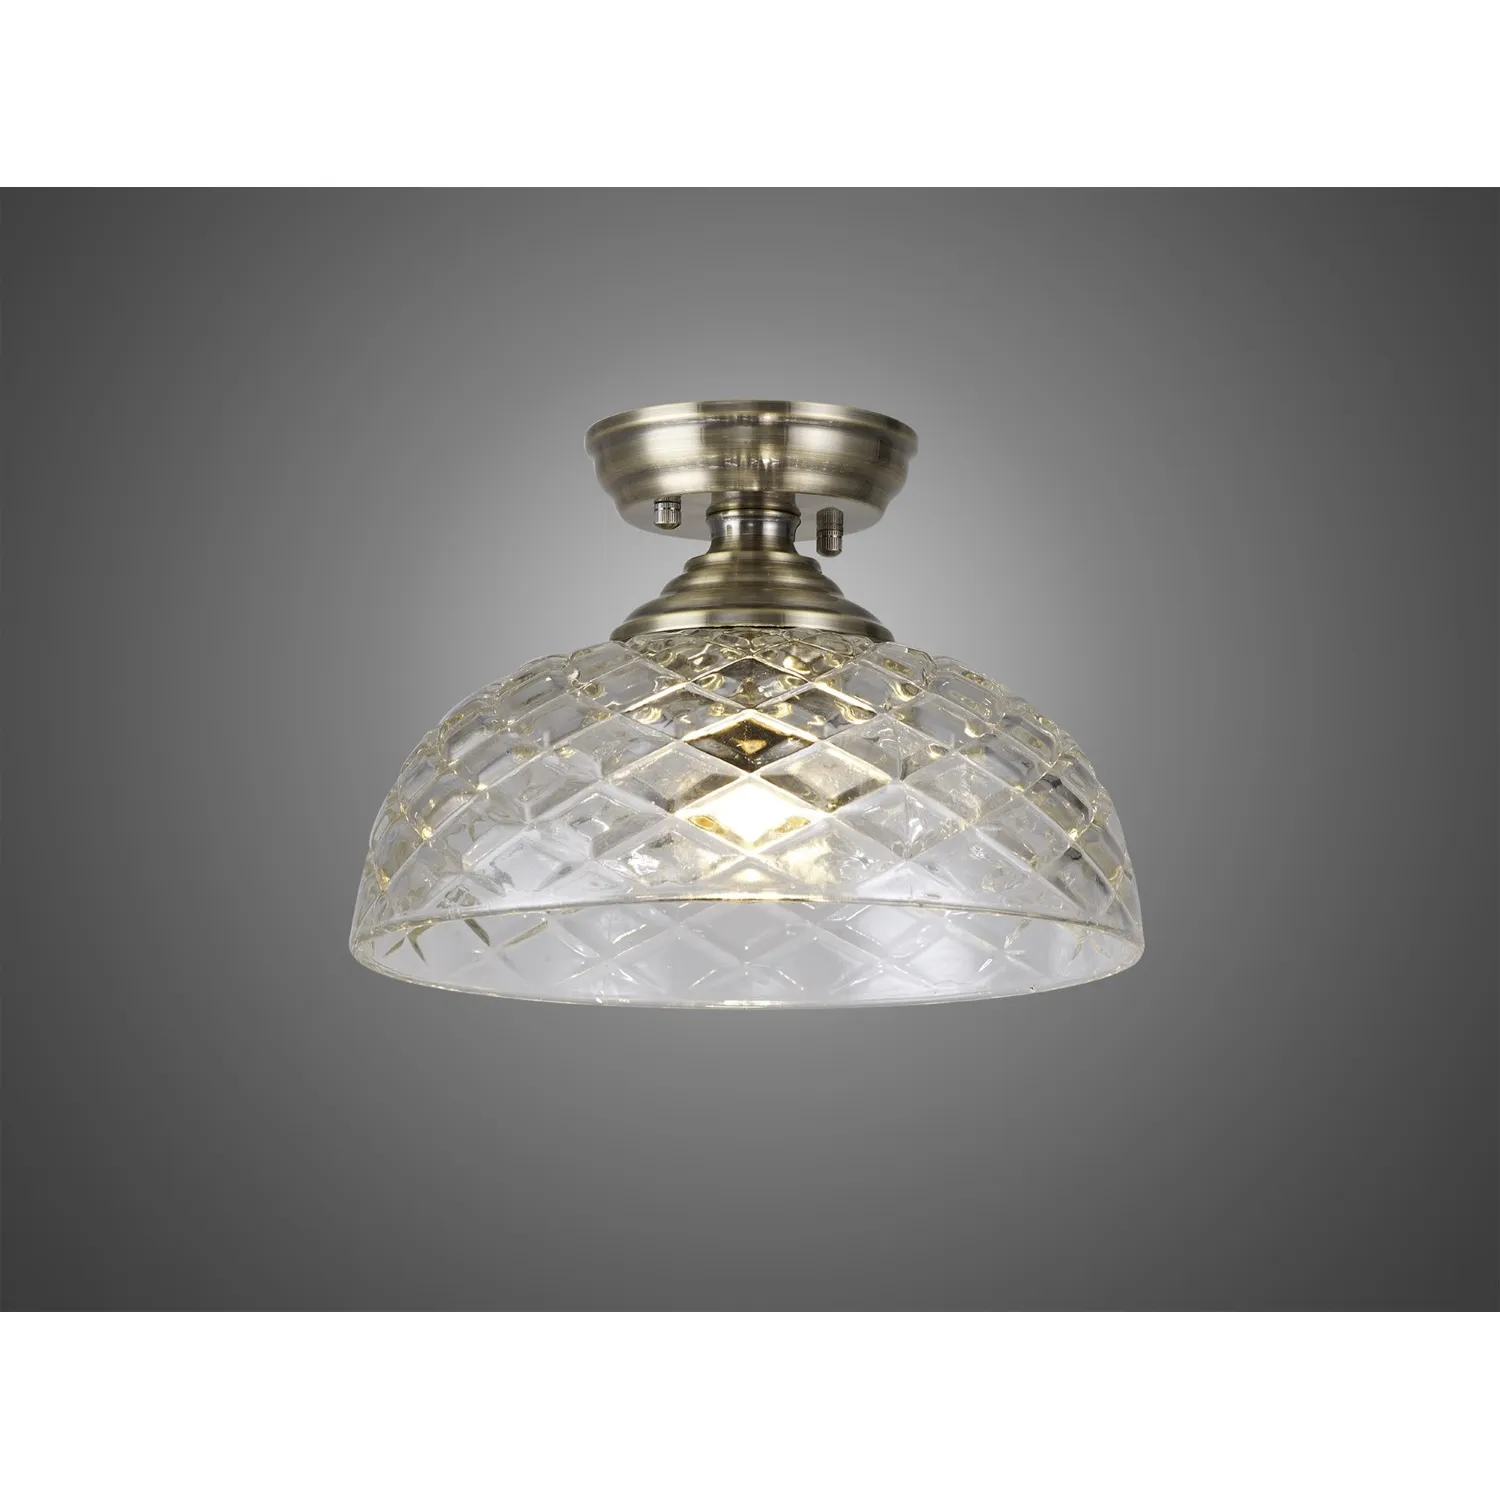 Billericay 1 Light Flush Ceiling E27 With Flat Round 30cm Patterned Glass Shade Antique Brass Clear